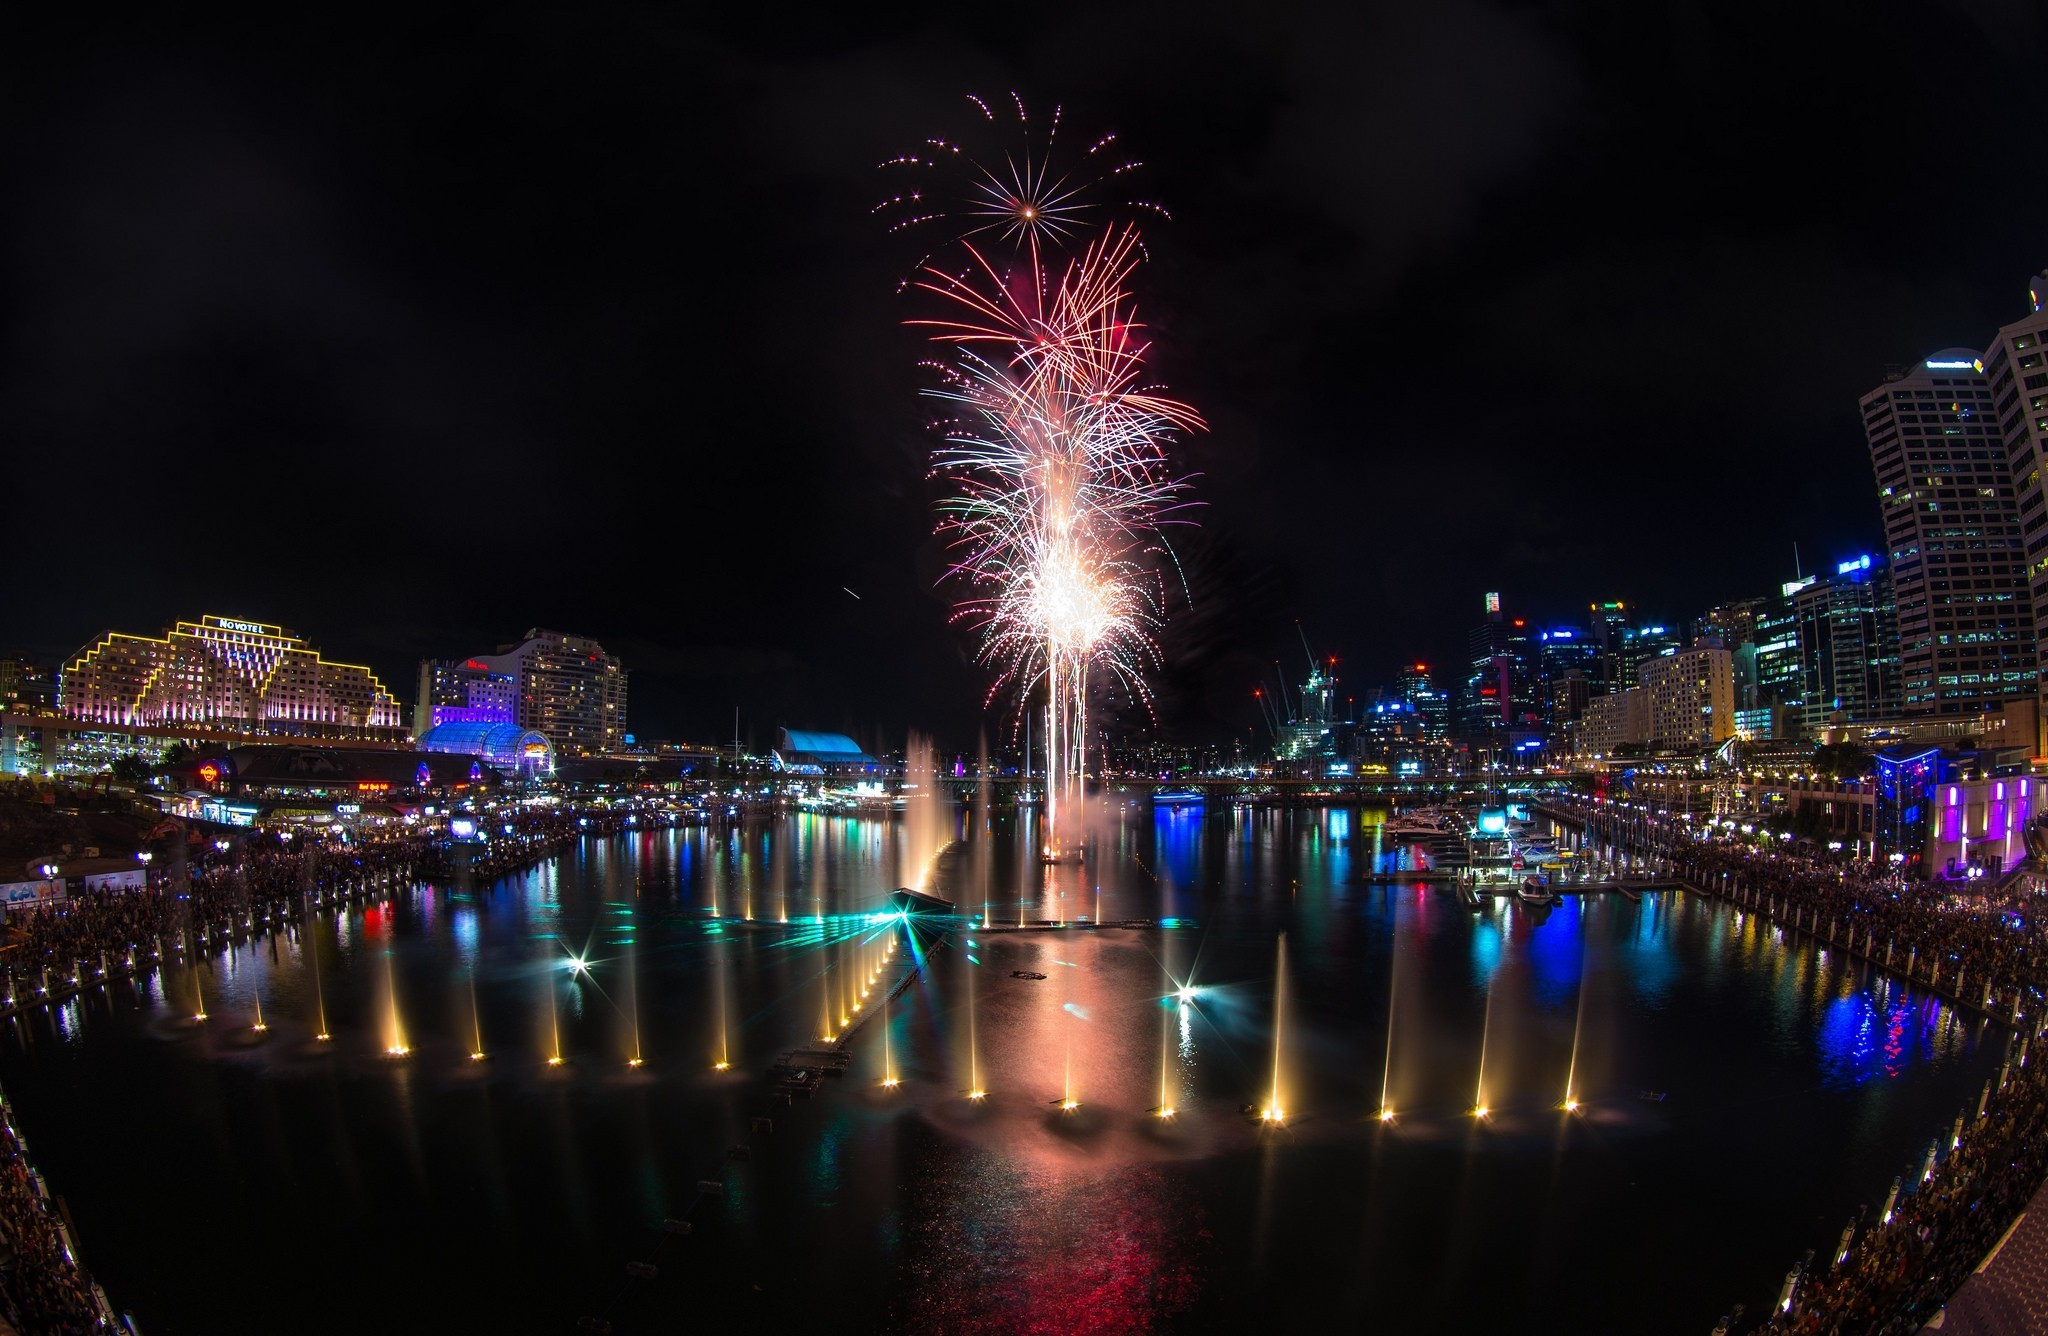 sydney, man made, australia, darling harbour, fireworks, fountain, cities 1080p